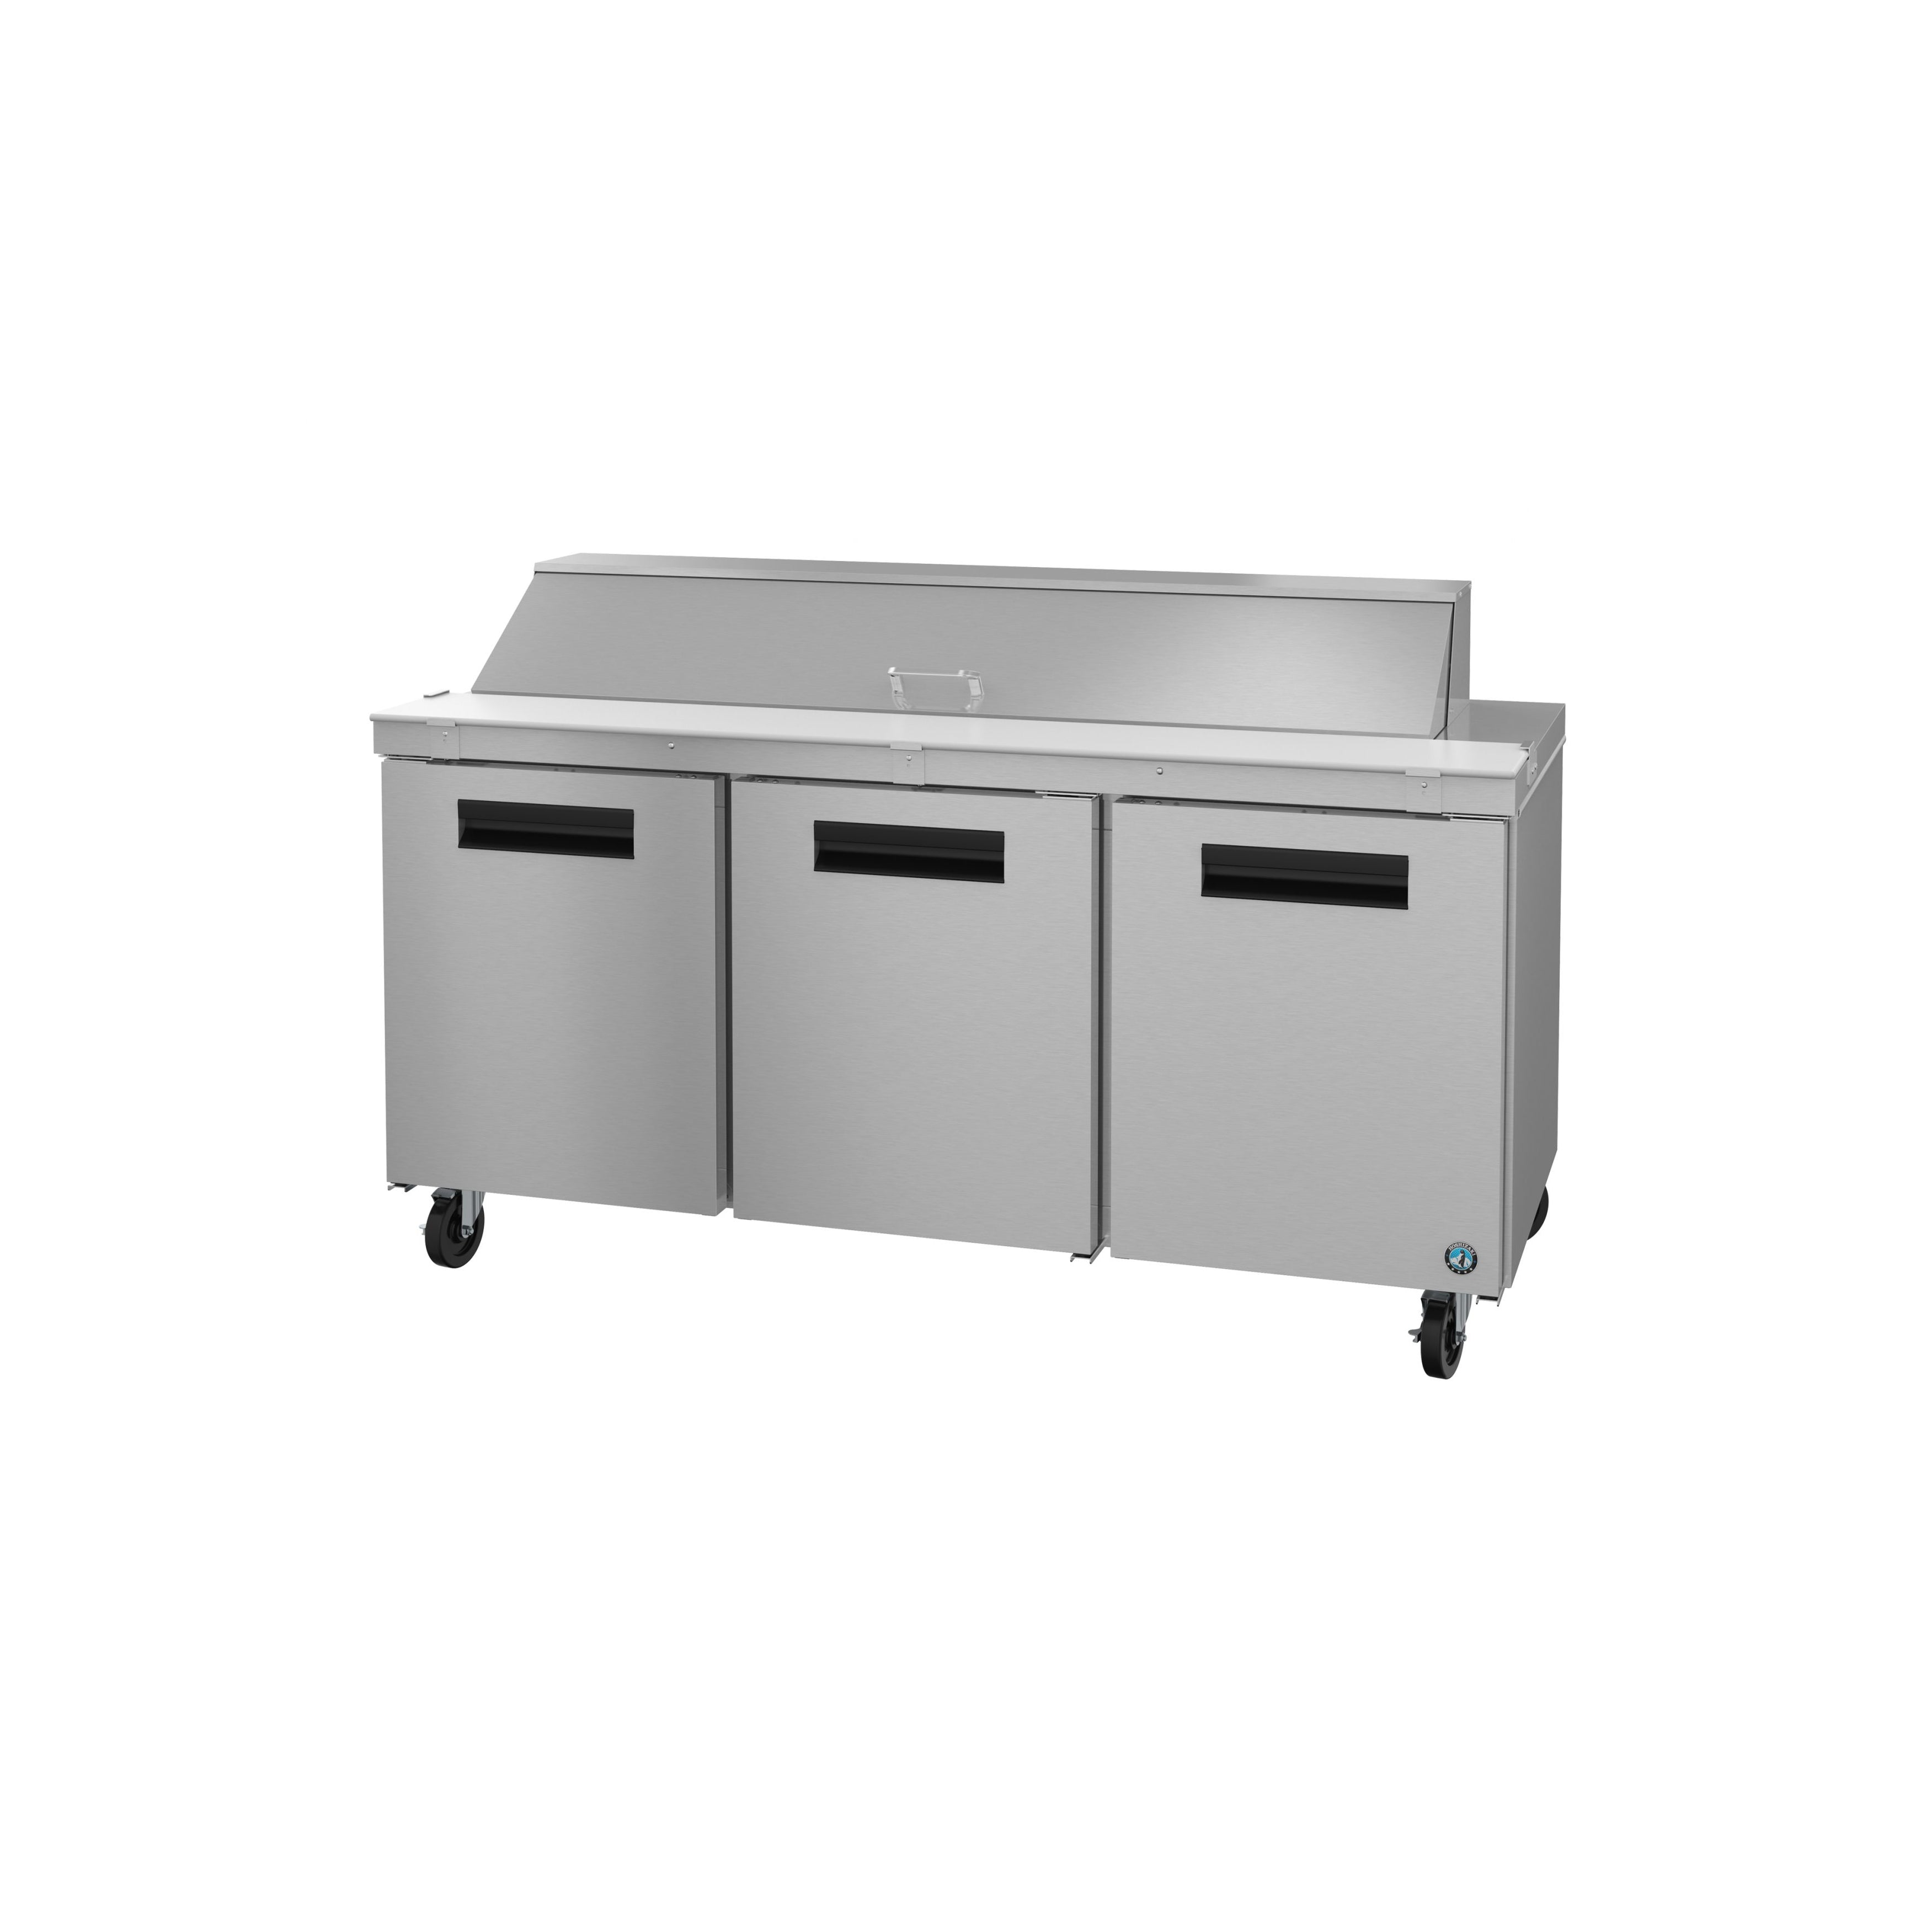 Hoshizaki - SR72B-18, Commercial 72" Three Section Sandwich Prep Table Refrigerator Stainless Doors 18cu.ft.